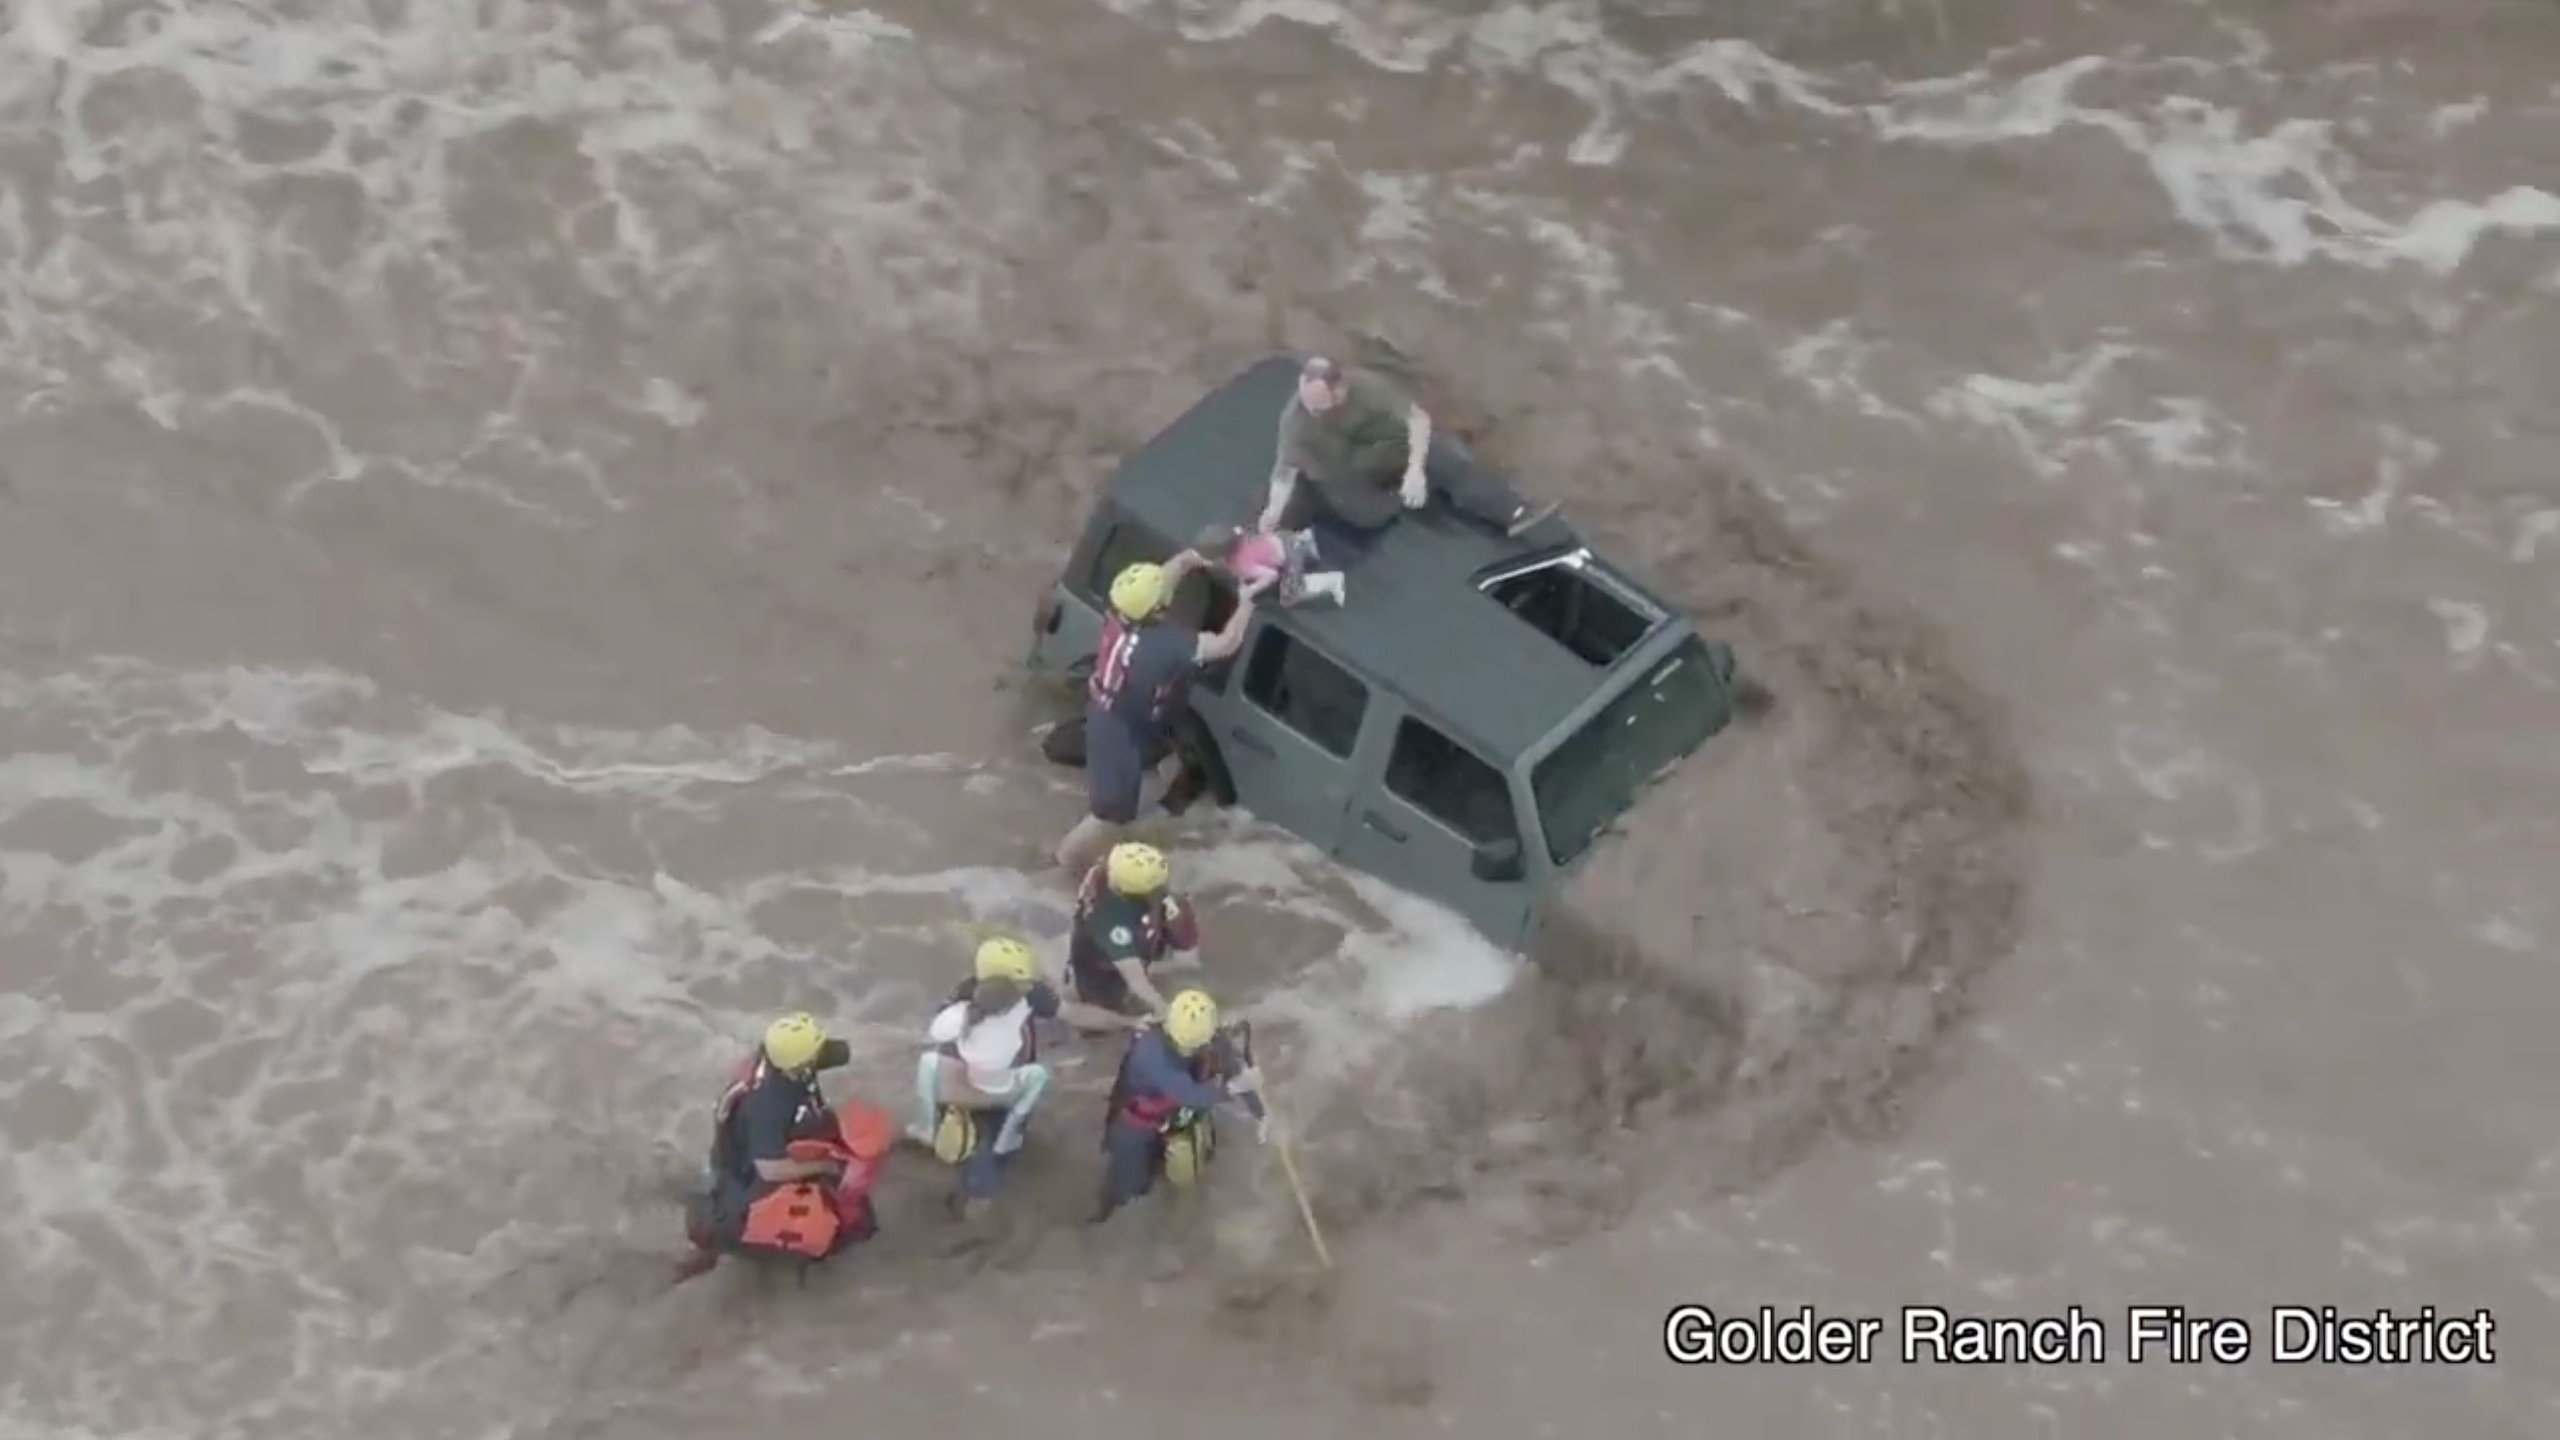 Firefighters rescue a man and two young girls who were stranded after their vehicle was washed away in flash floods near Tucson, Arizona, U.S., July 14, 2021, in this still image taken from video footage obtained from social media. Golder Ranch Fire District/via REUTERS THIS IMAGE HAS BEEN SUPPLIED BY A THIRD PARTY. MANDATORY CREDIT. NO RESALES. NO ARCHIVES. MUST NOT OBSCURE LOGO.